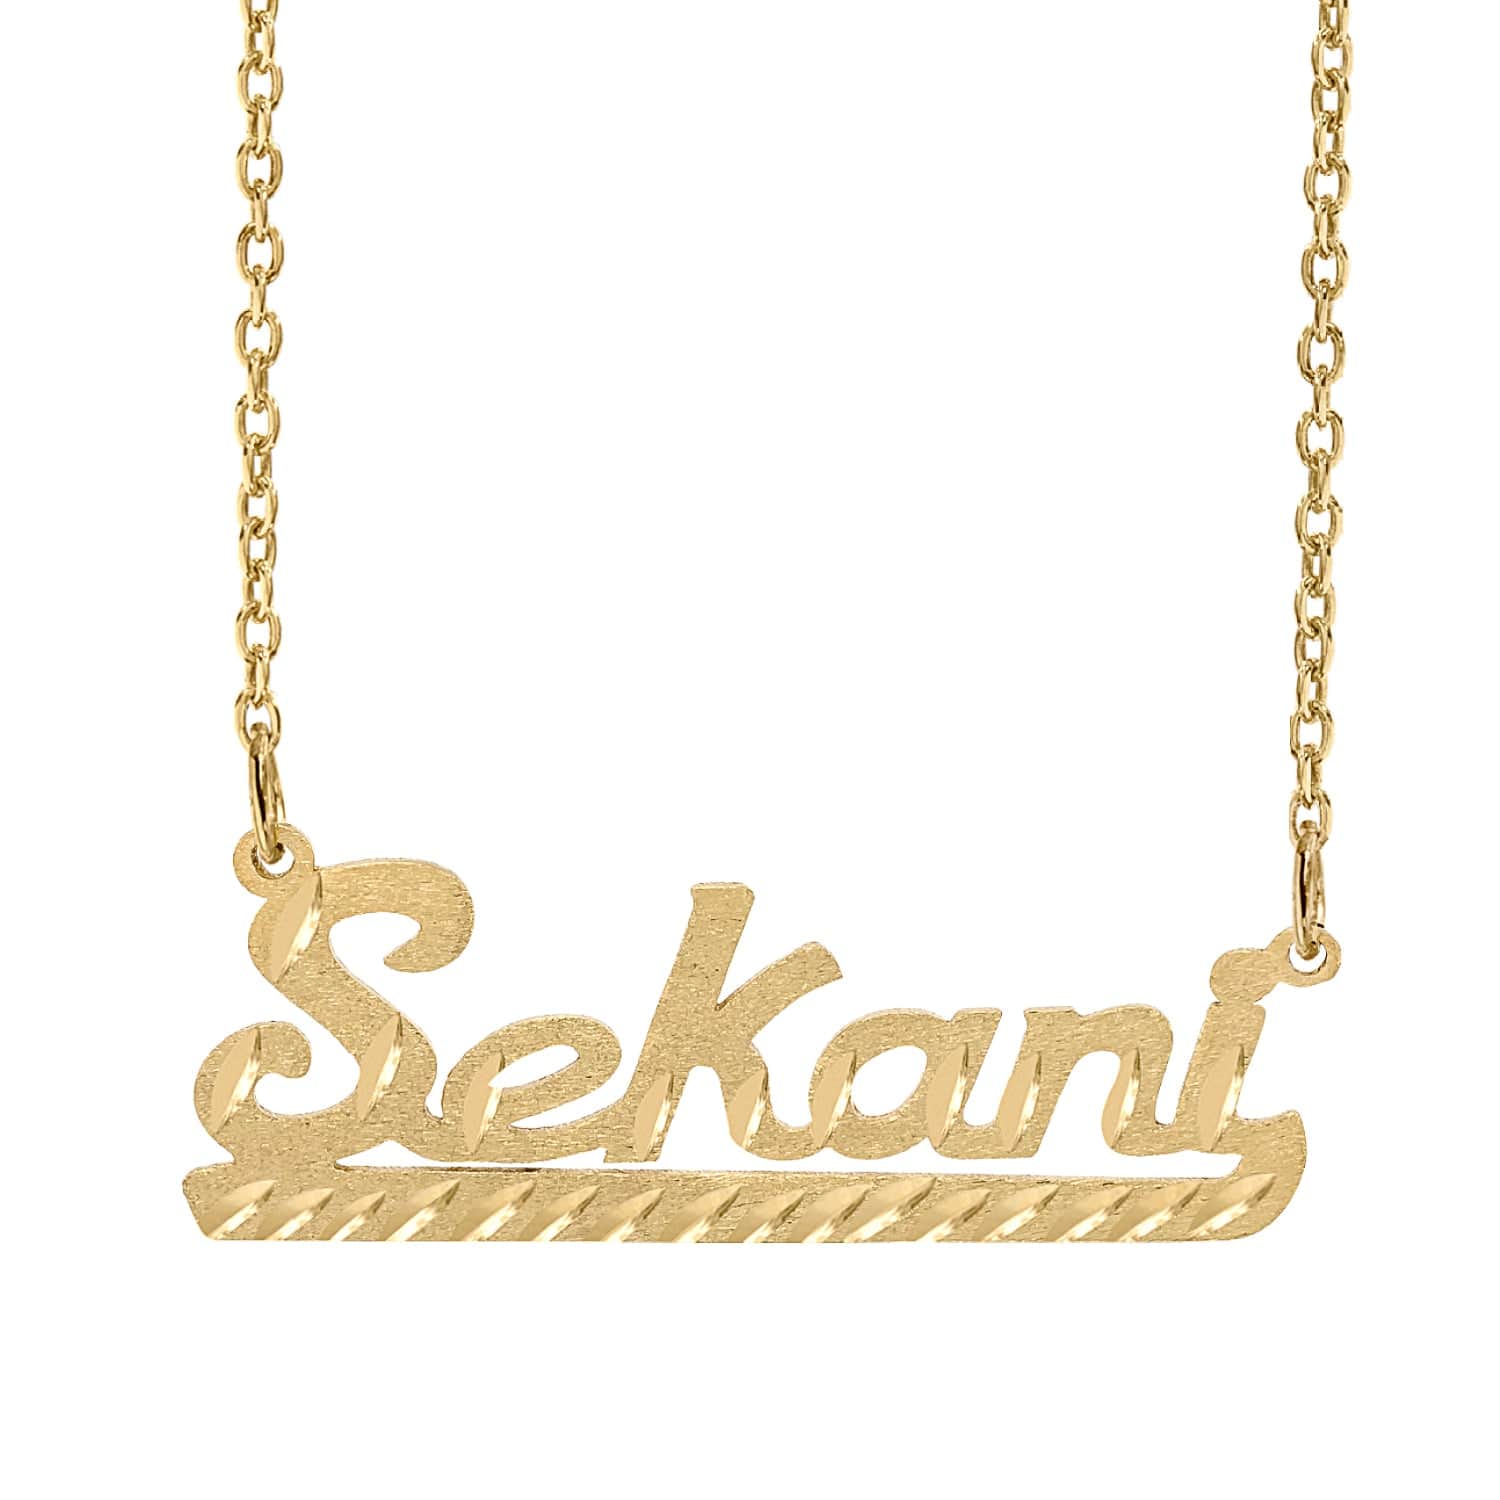 Personalized Name necklace with Diamond Cut "Sekani"